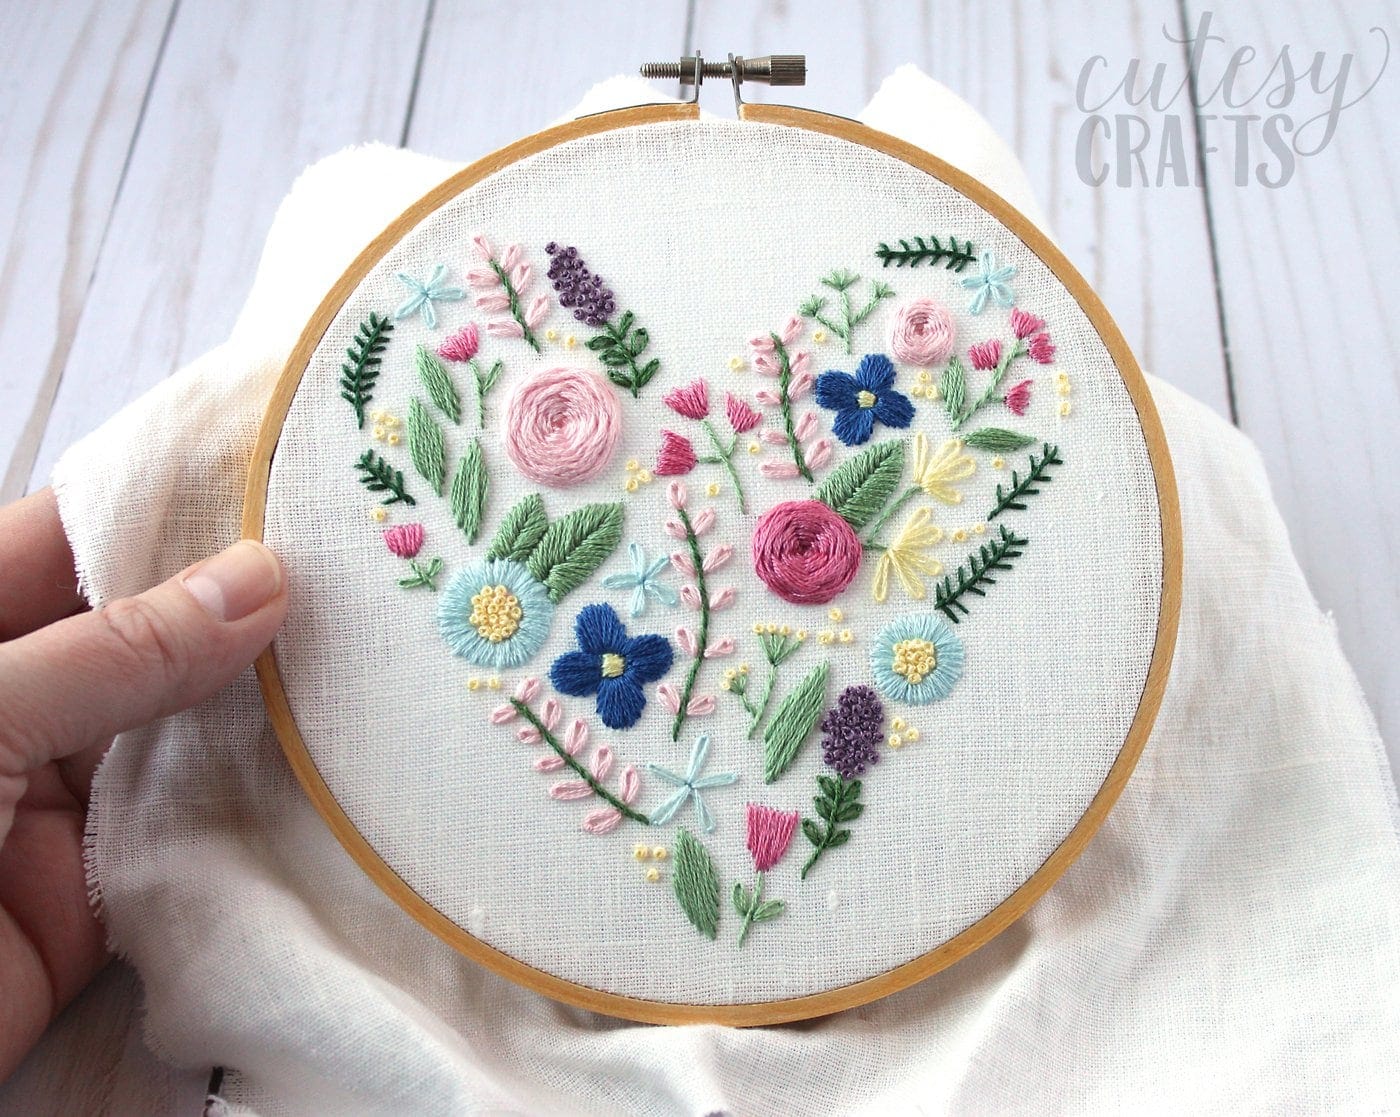 Learn hand embroidery stitches with this beautiful free floral heart embroidery pattern #embroiderypattern #handembroidery #embroideredflowers #embroiderystitches #handembroiderystitches